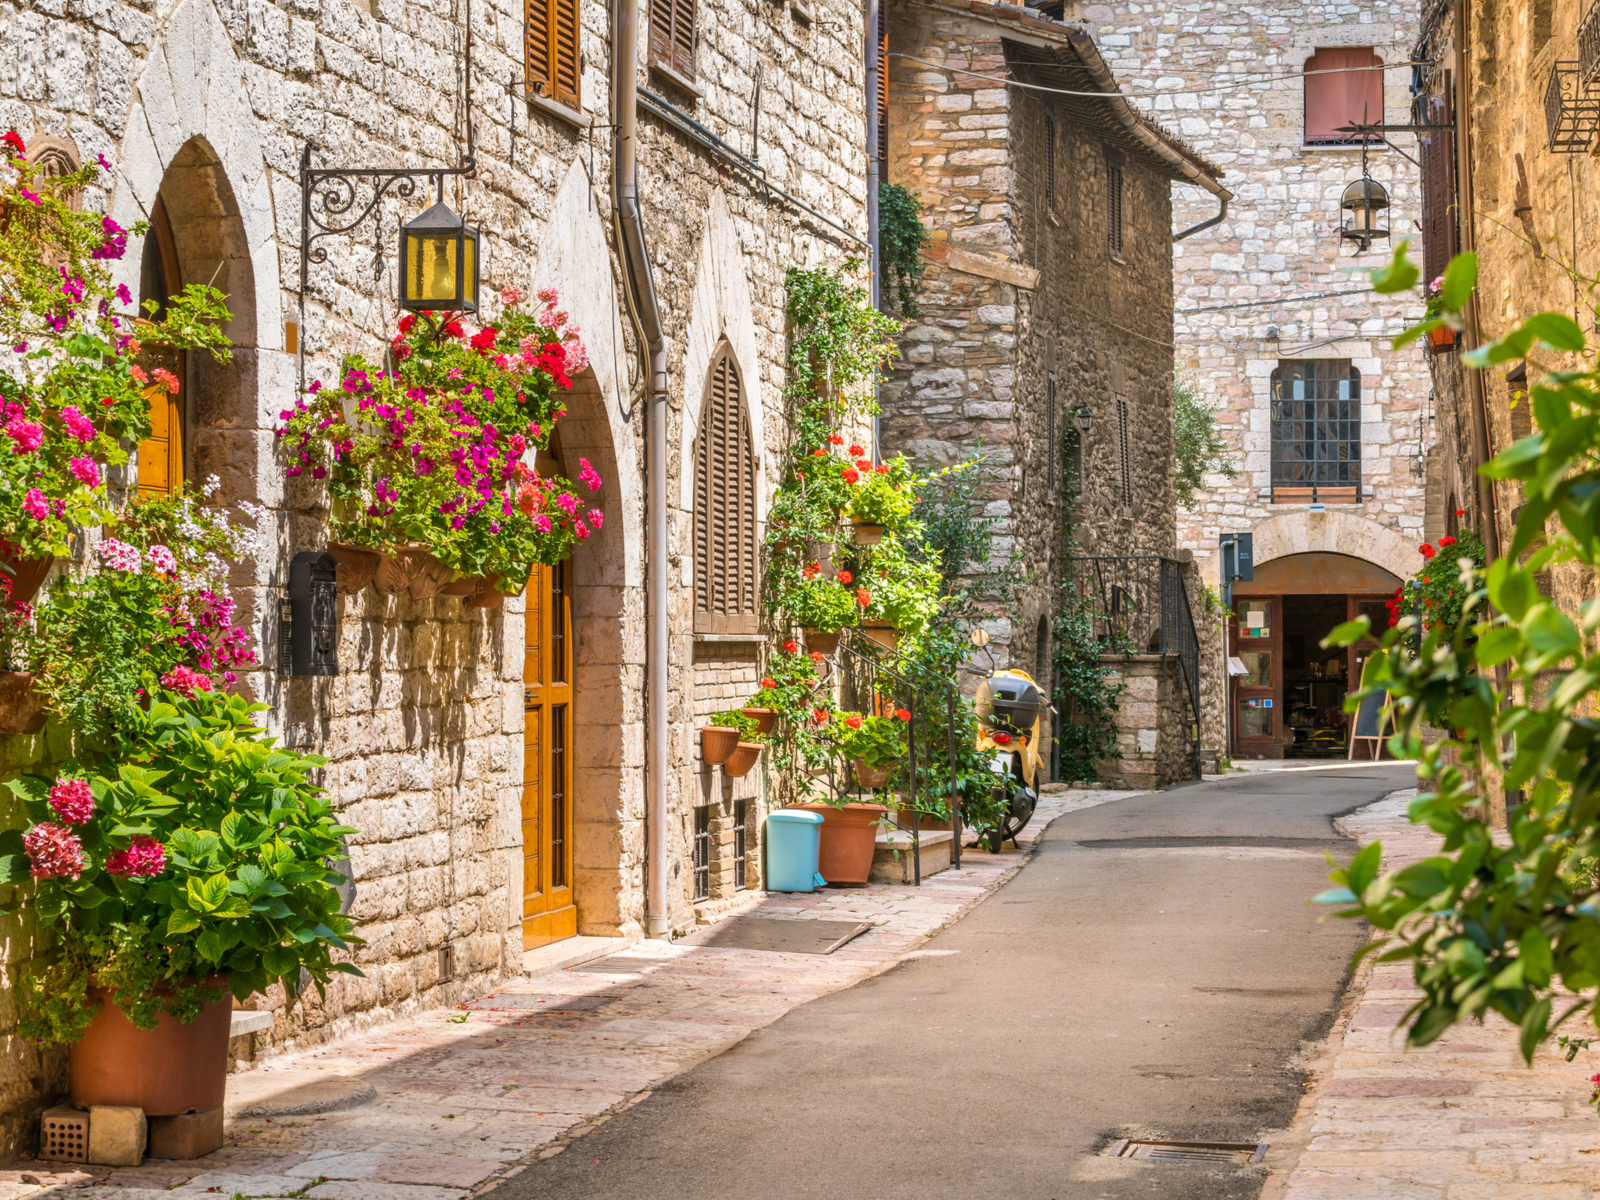 Picturesque view of a street in Perugia, Italy, one of the country's best places to visit